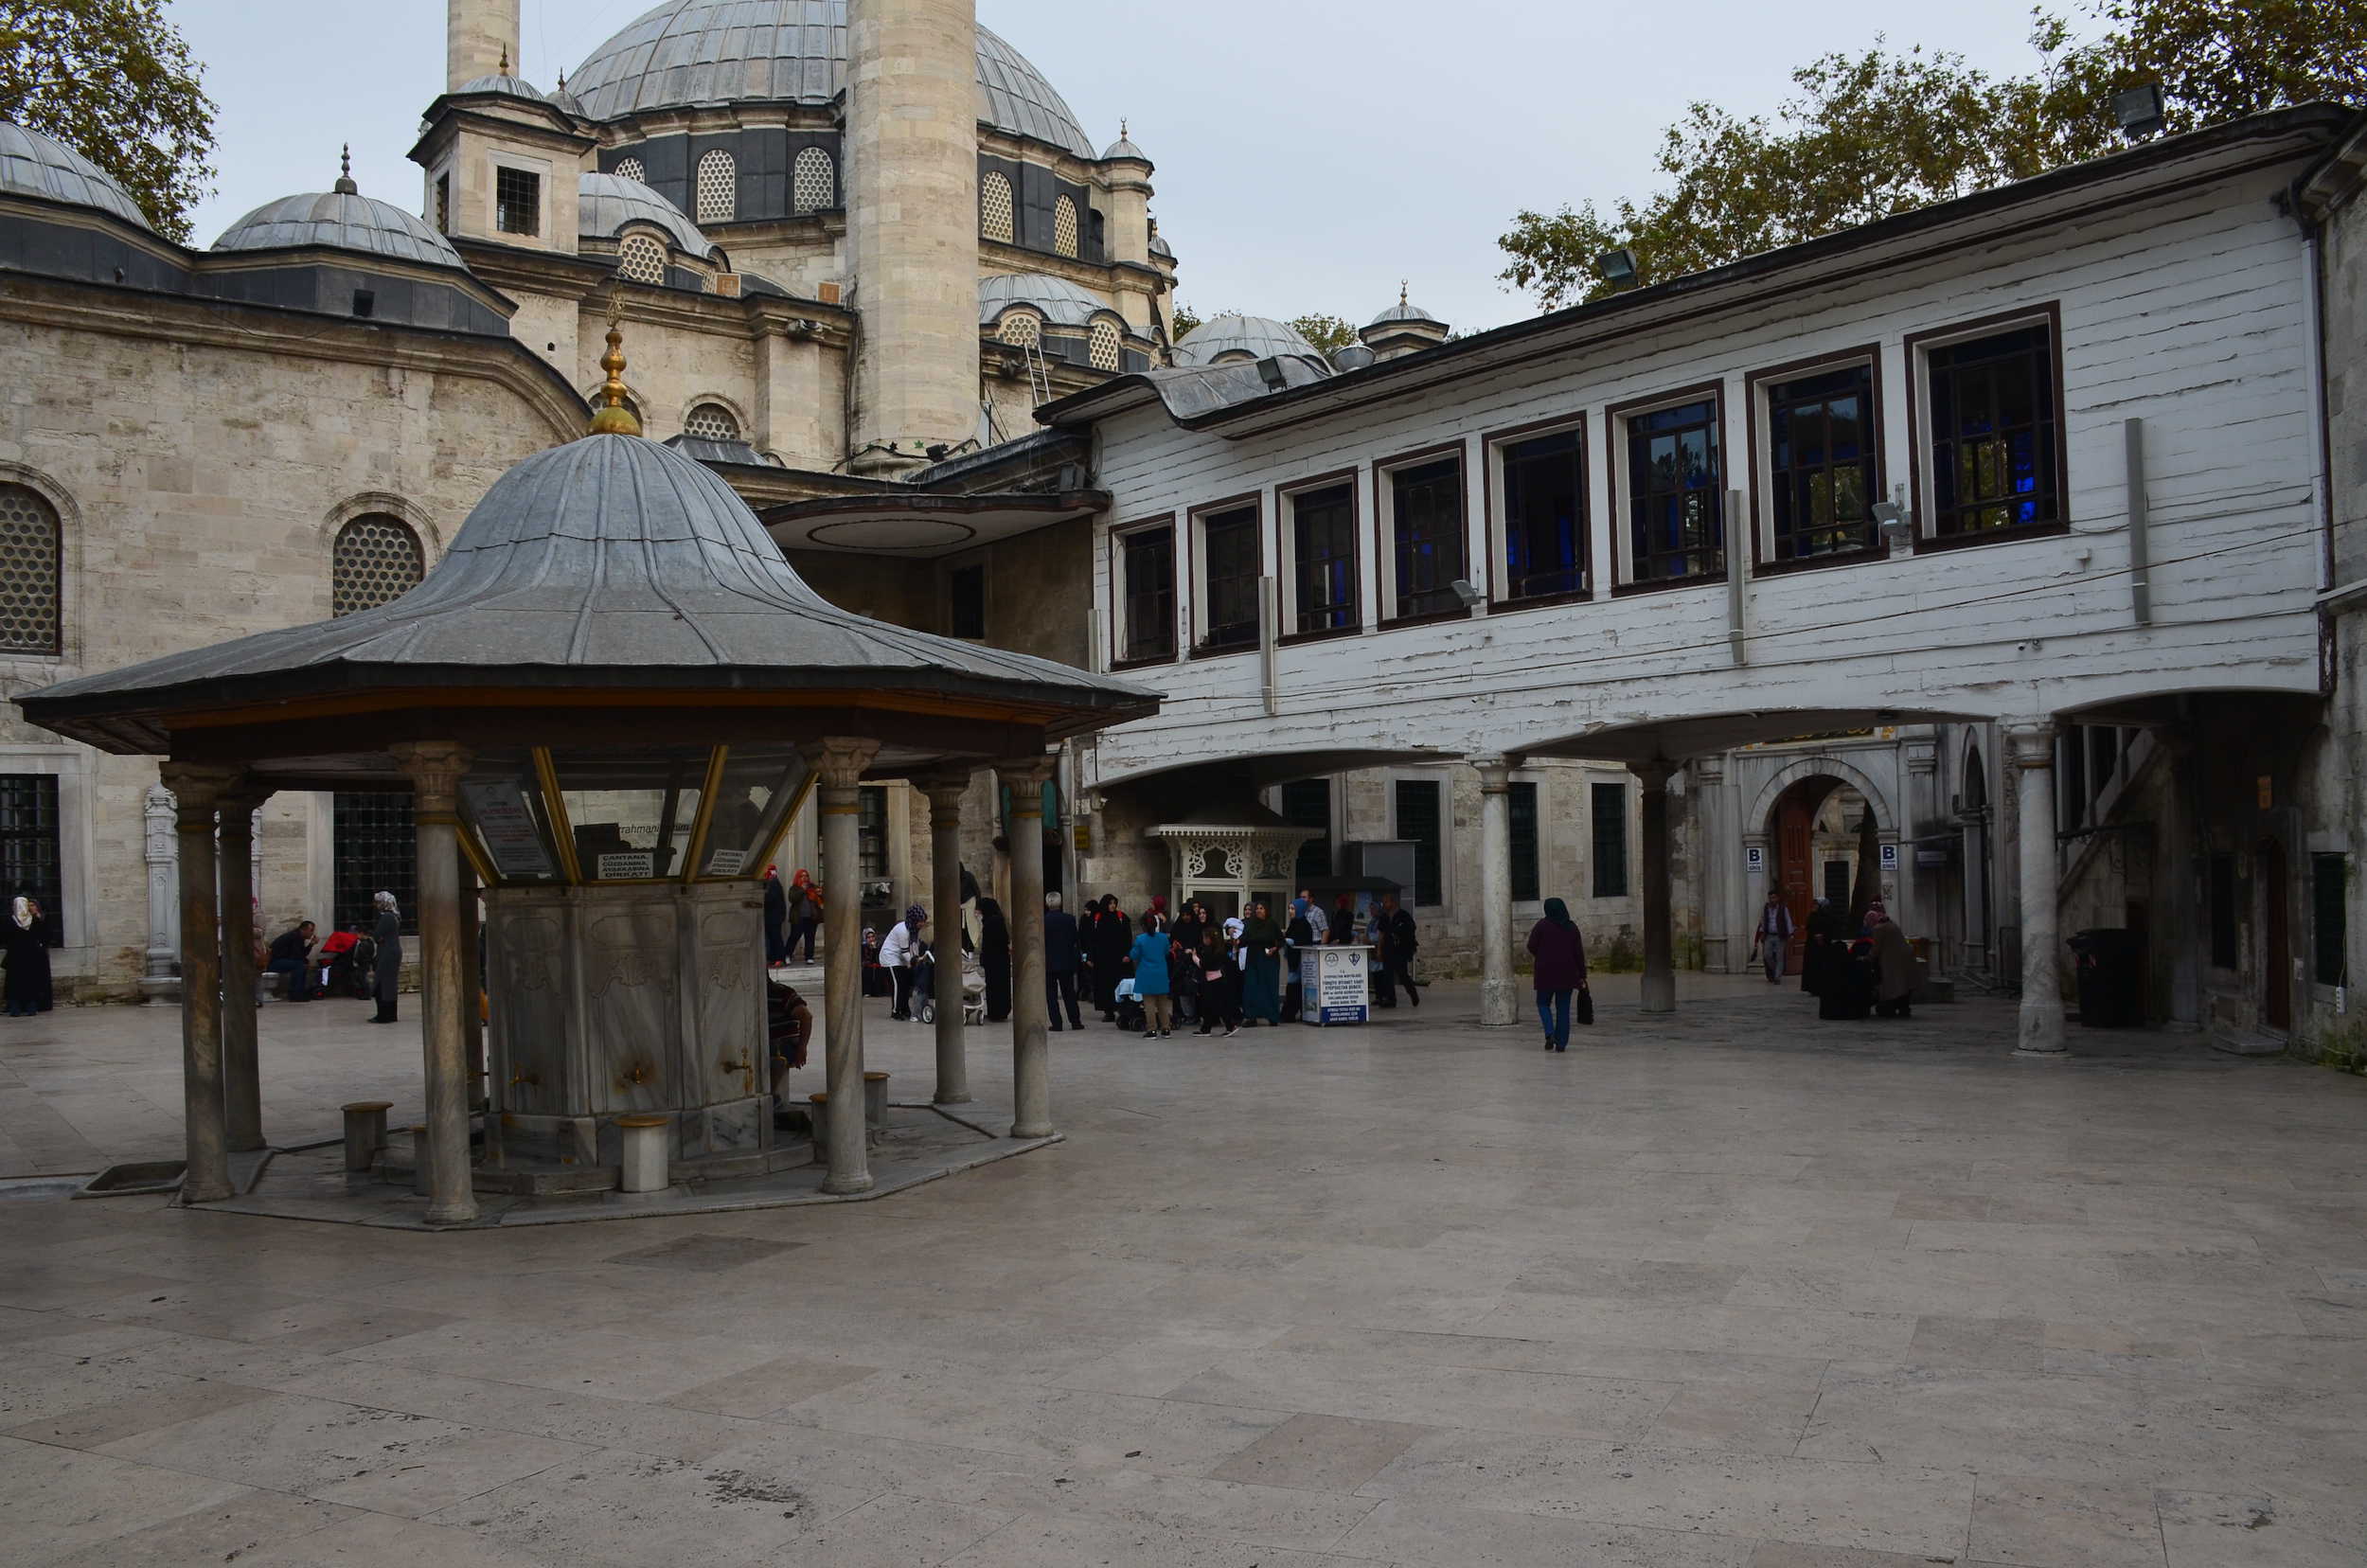 Outer courtyard at Eyüp Sultan Mosque in Istanbul, Turkey